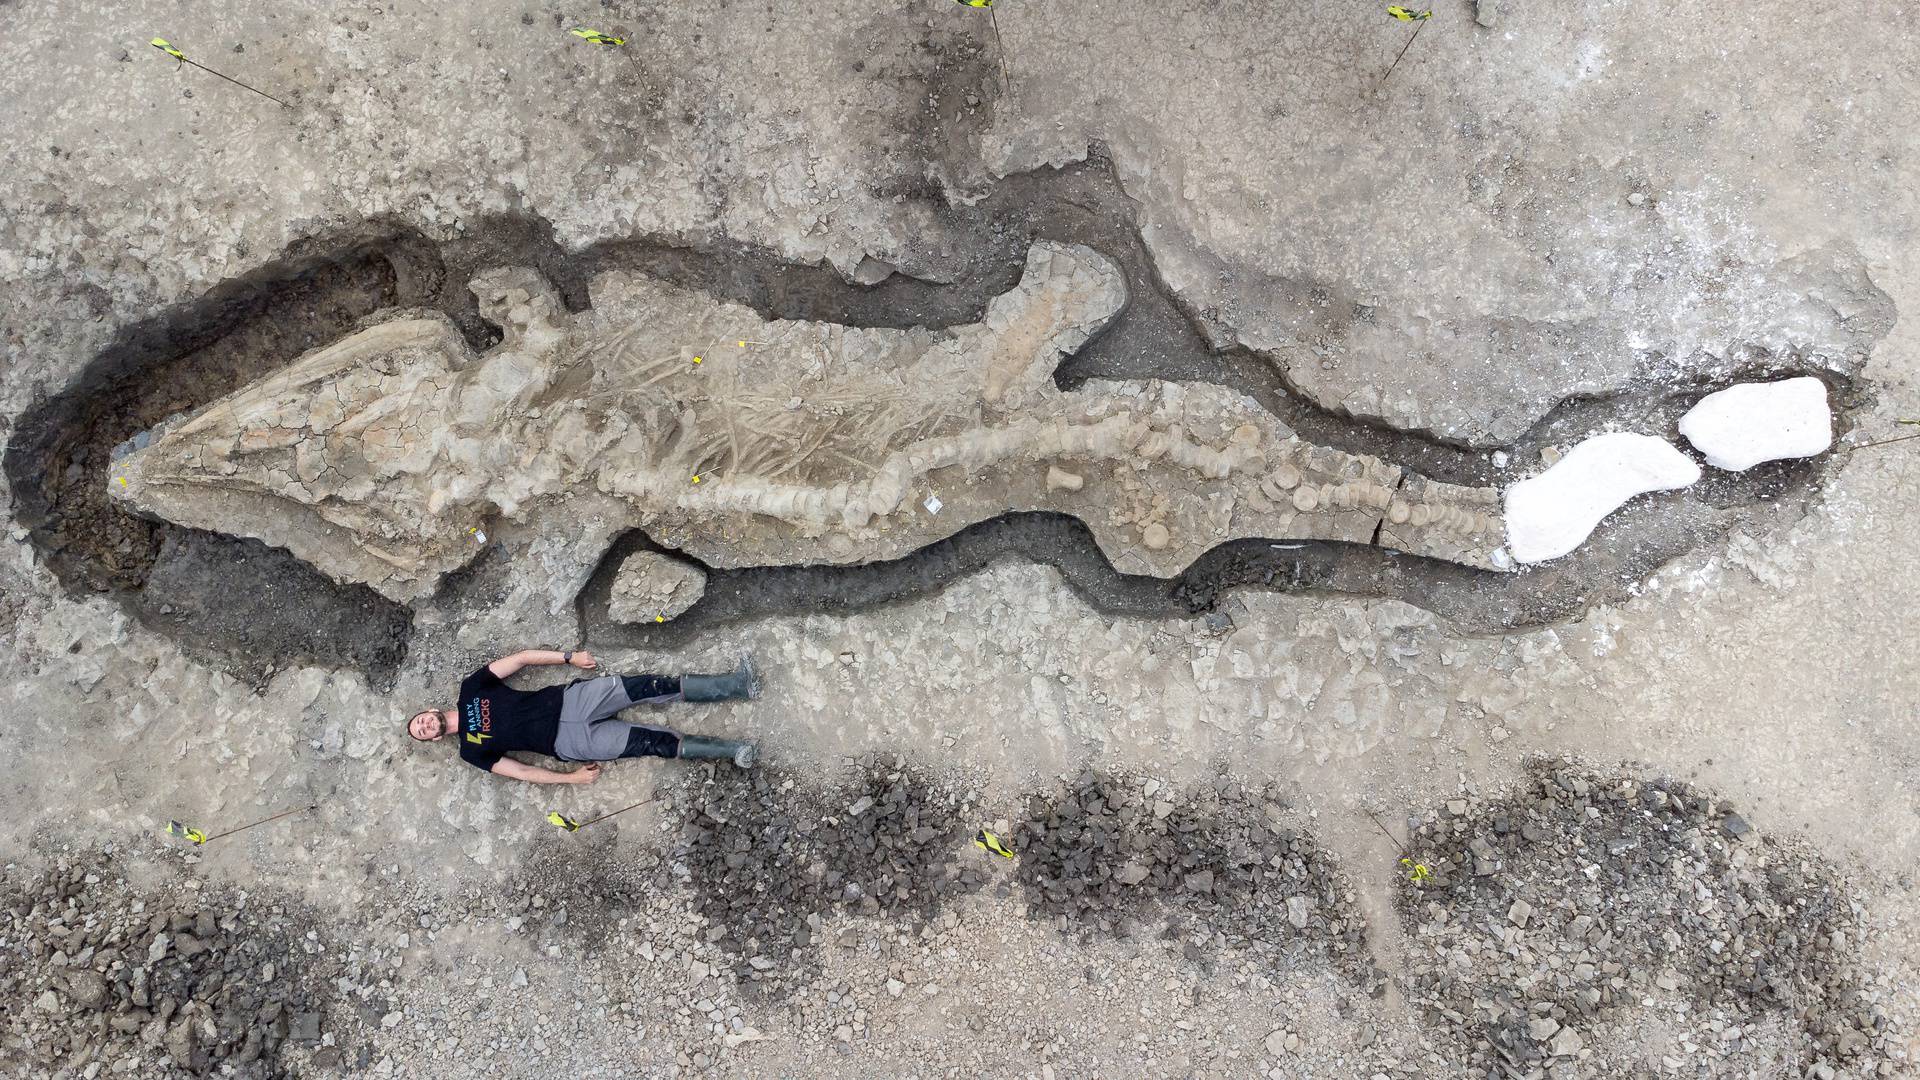 A man poses next to excavated remains of a Britain's largest ichthyosaur, at Rutland Water